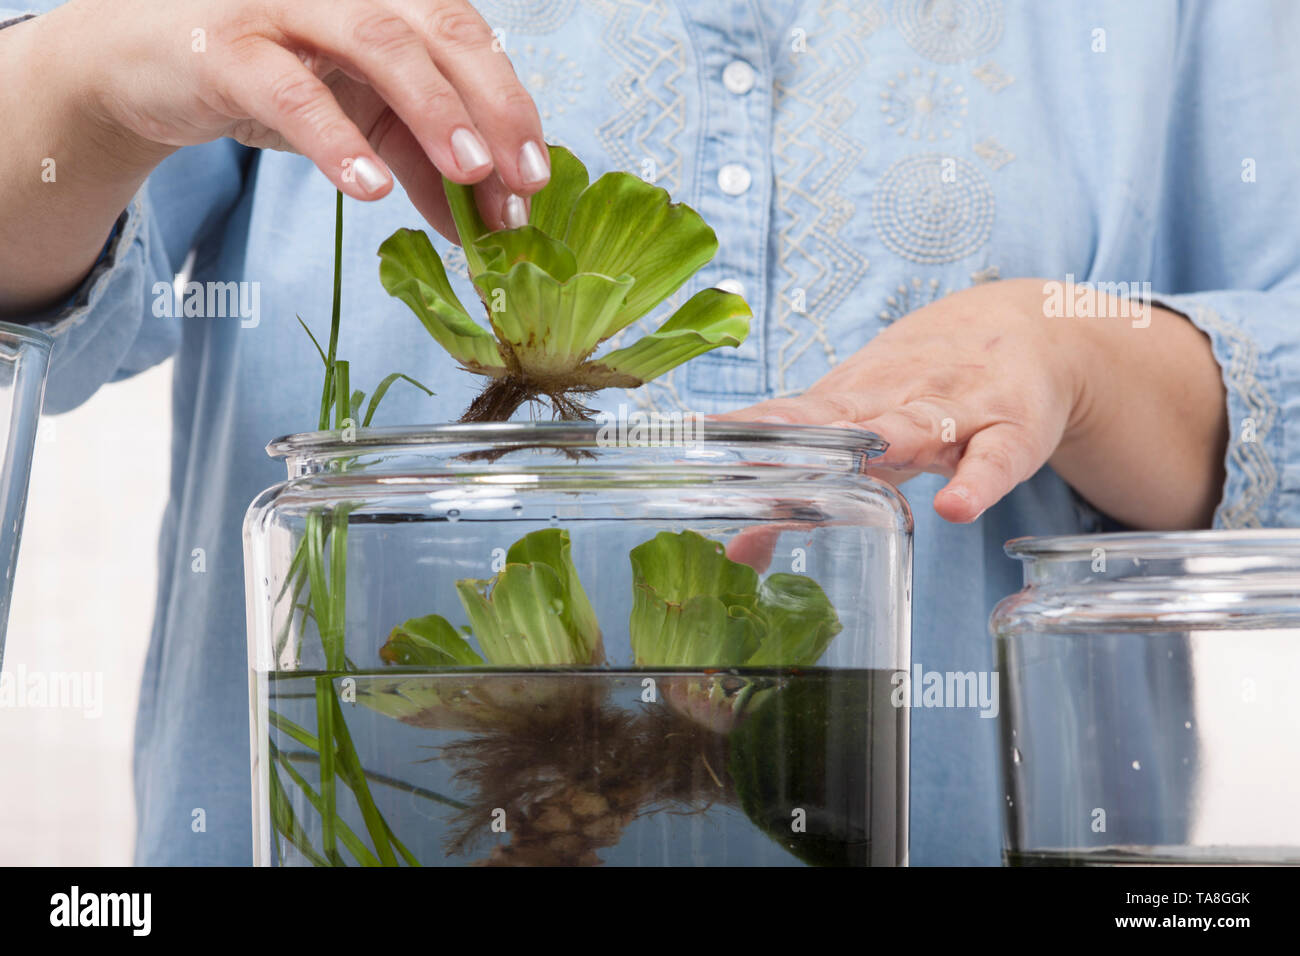 Water Lettuce, Pistia stratiotes, being Placed in Container Water Garden Stock Photo